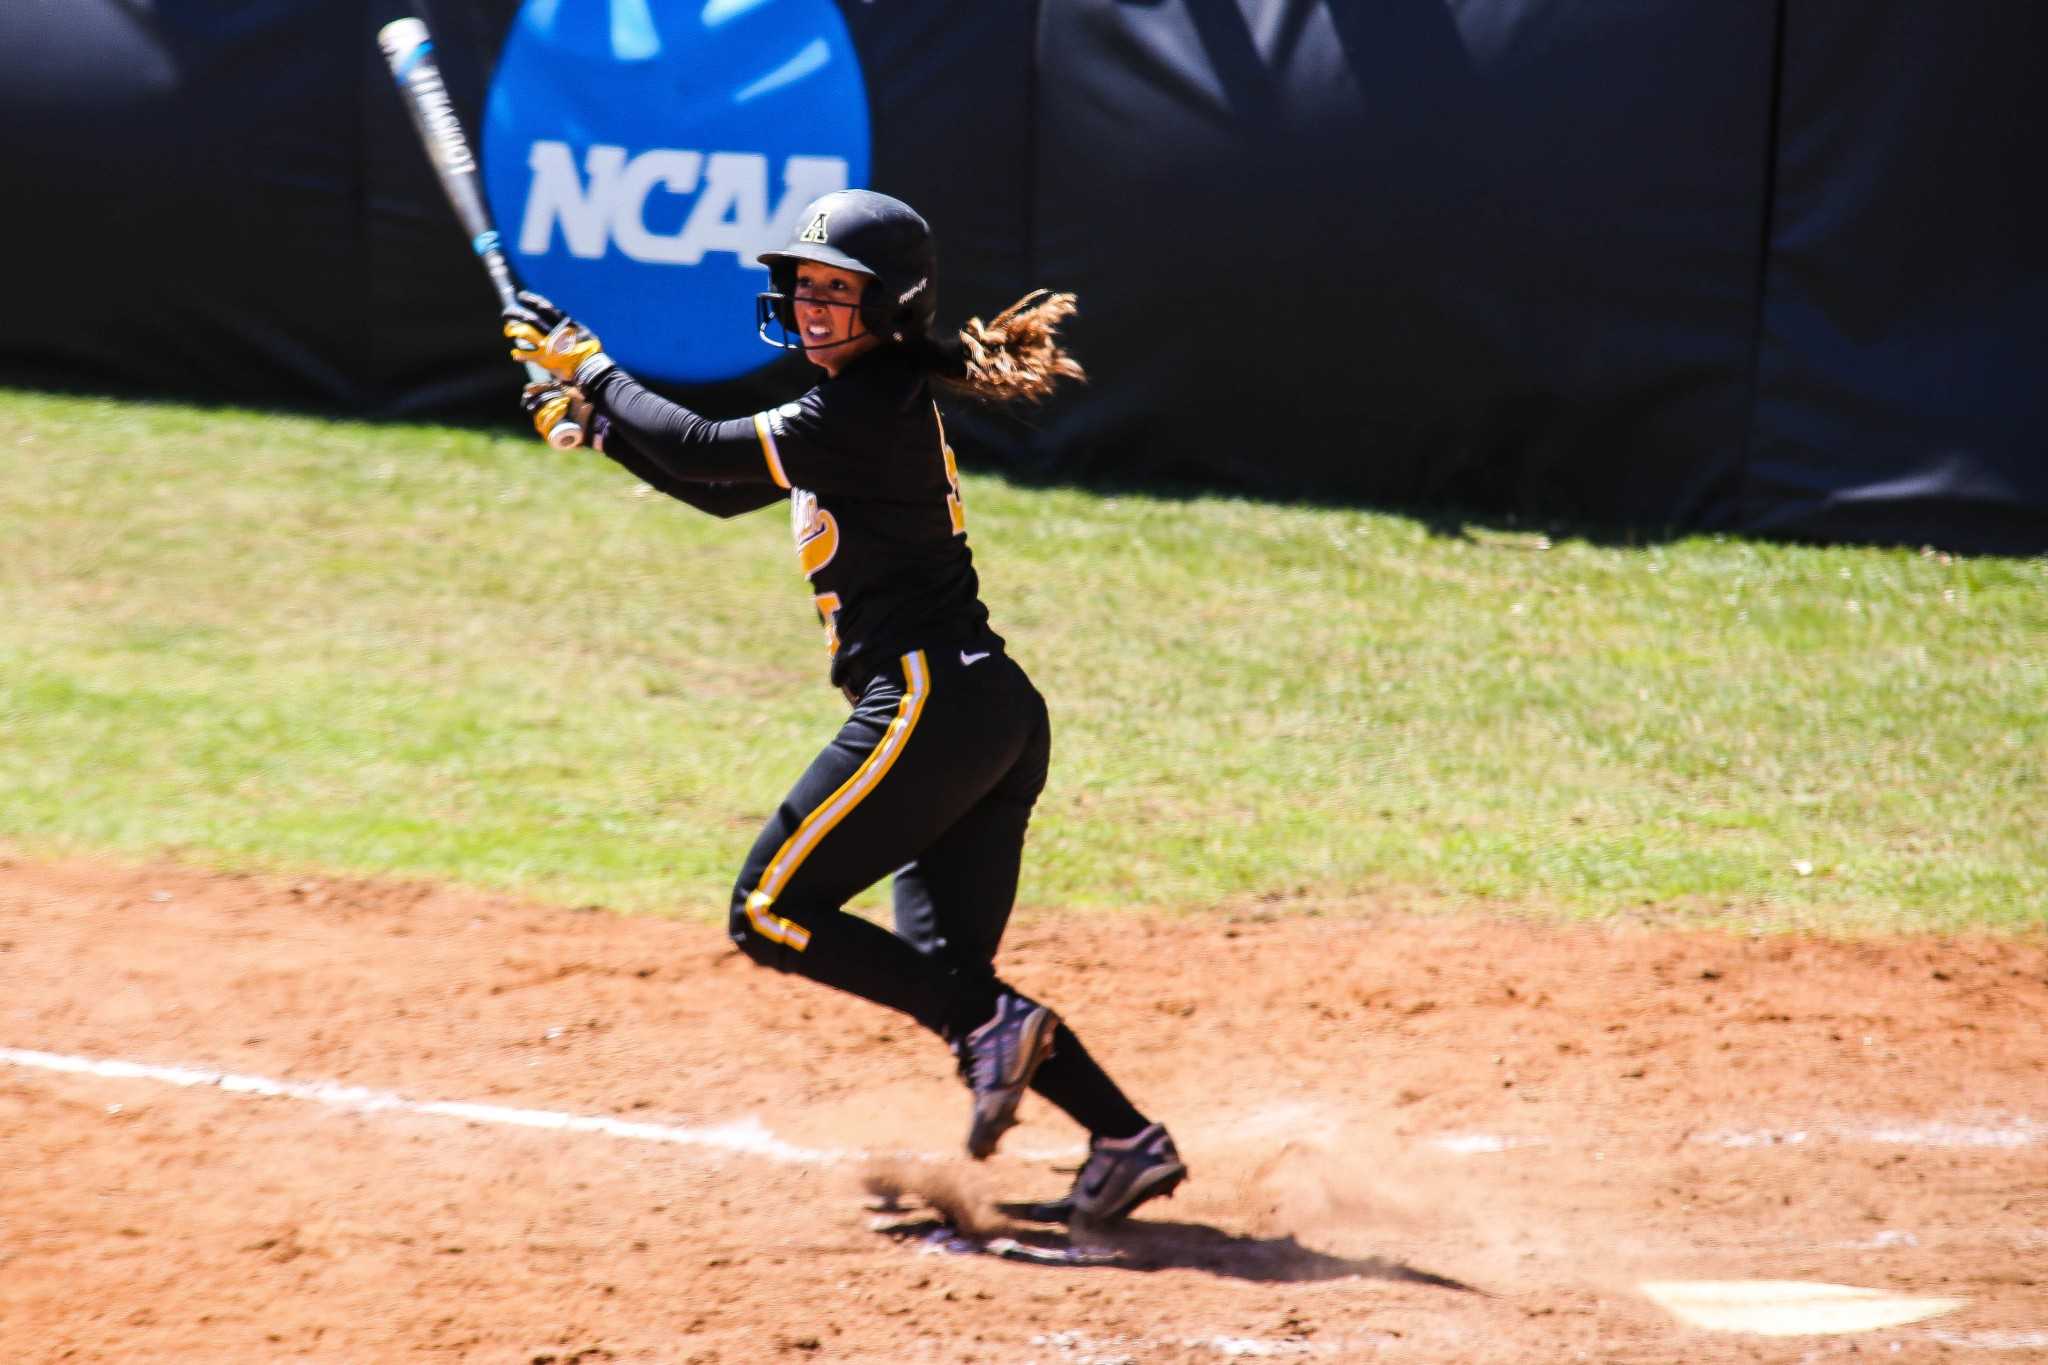 Senior+outfielder+Dani+Heichen+connects+for+a+triple+during+game+three+of+App+States+home+series+against+UT+Arlington.+The+Mountaineers+%289-21%2C+0-12%29+were+swept+by+the+Mavericks.%0A%0AGerrit+Van+Genderen+%7C+The+Appalachian